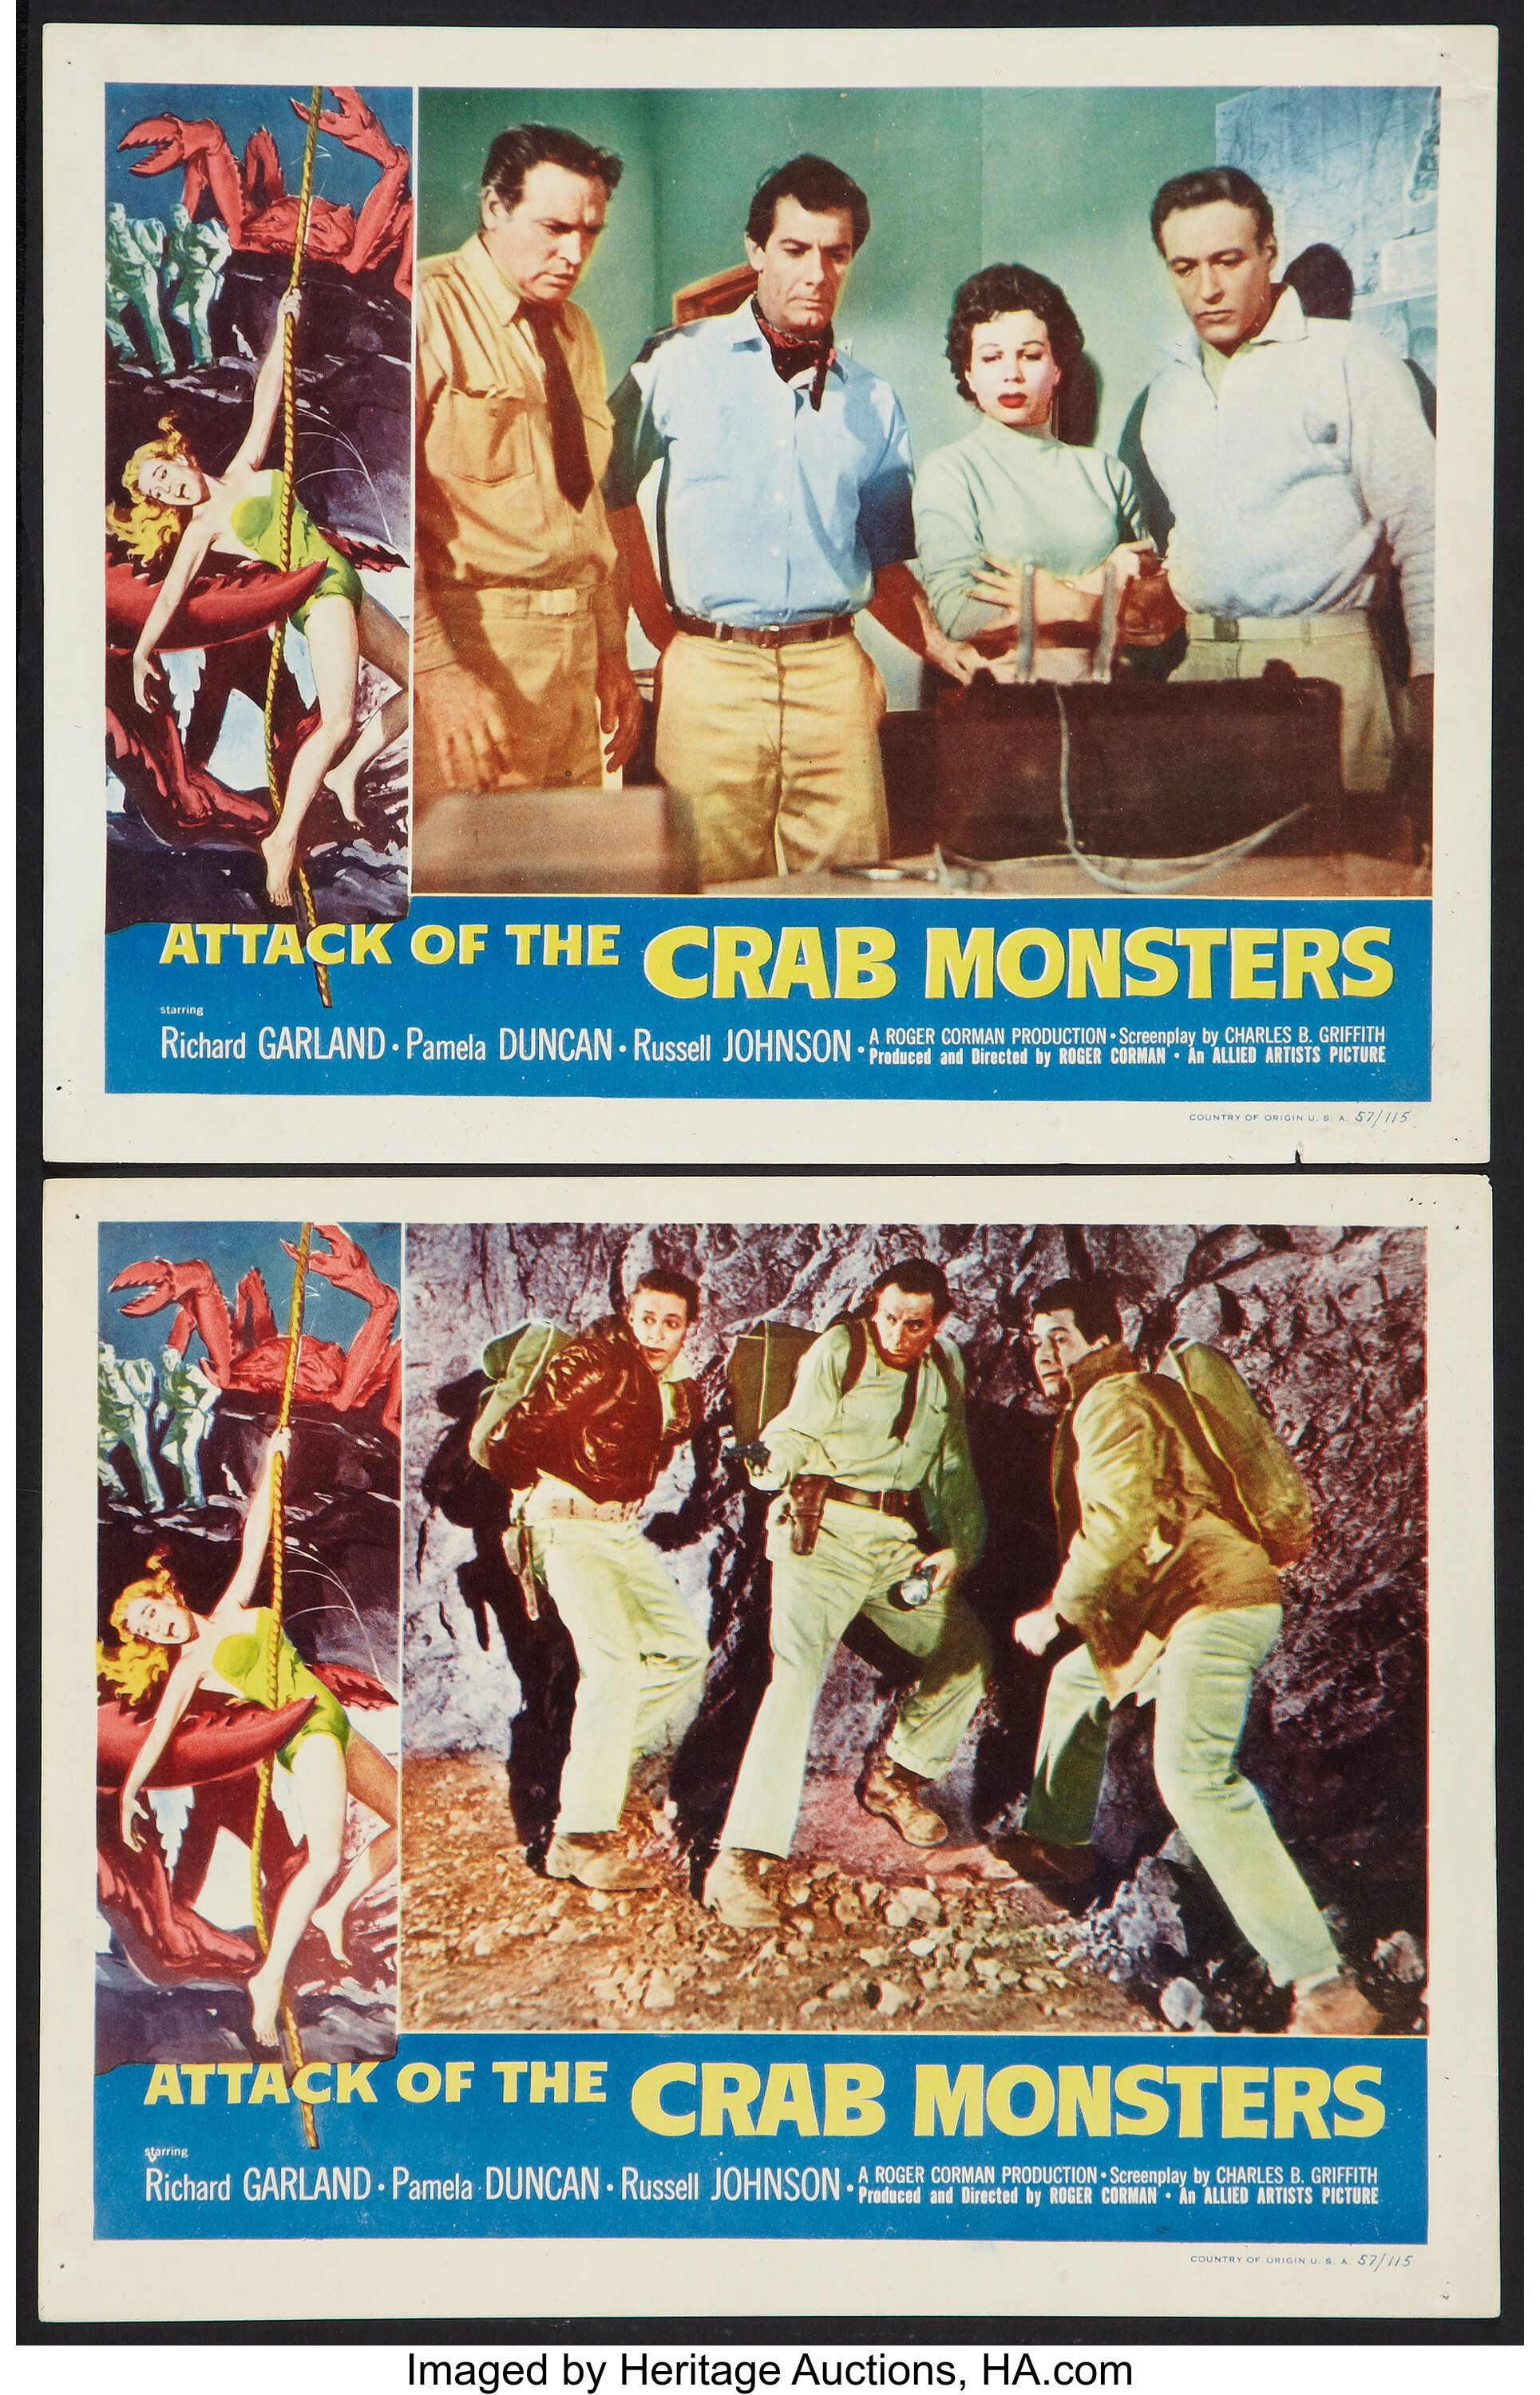 Attack Of The Crab Monsters Allied Artists 1957 Lobby Cards 2 Lot 53026 Heritage Auctions